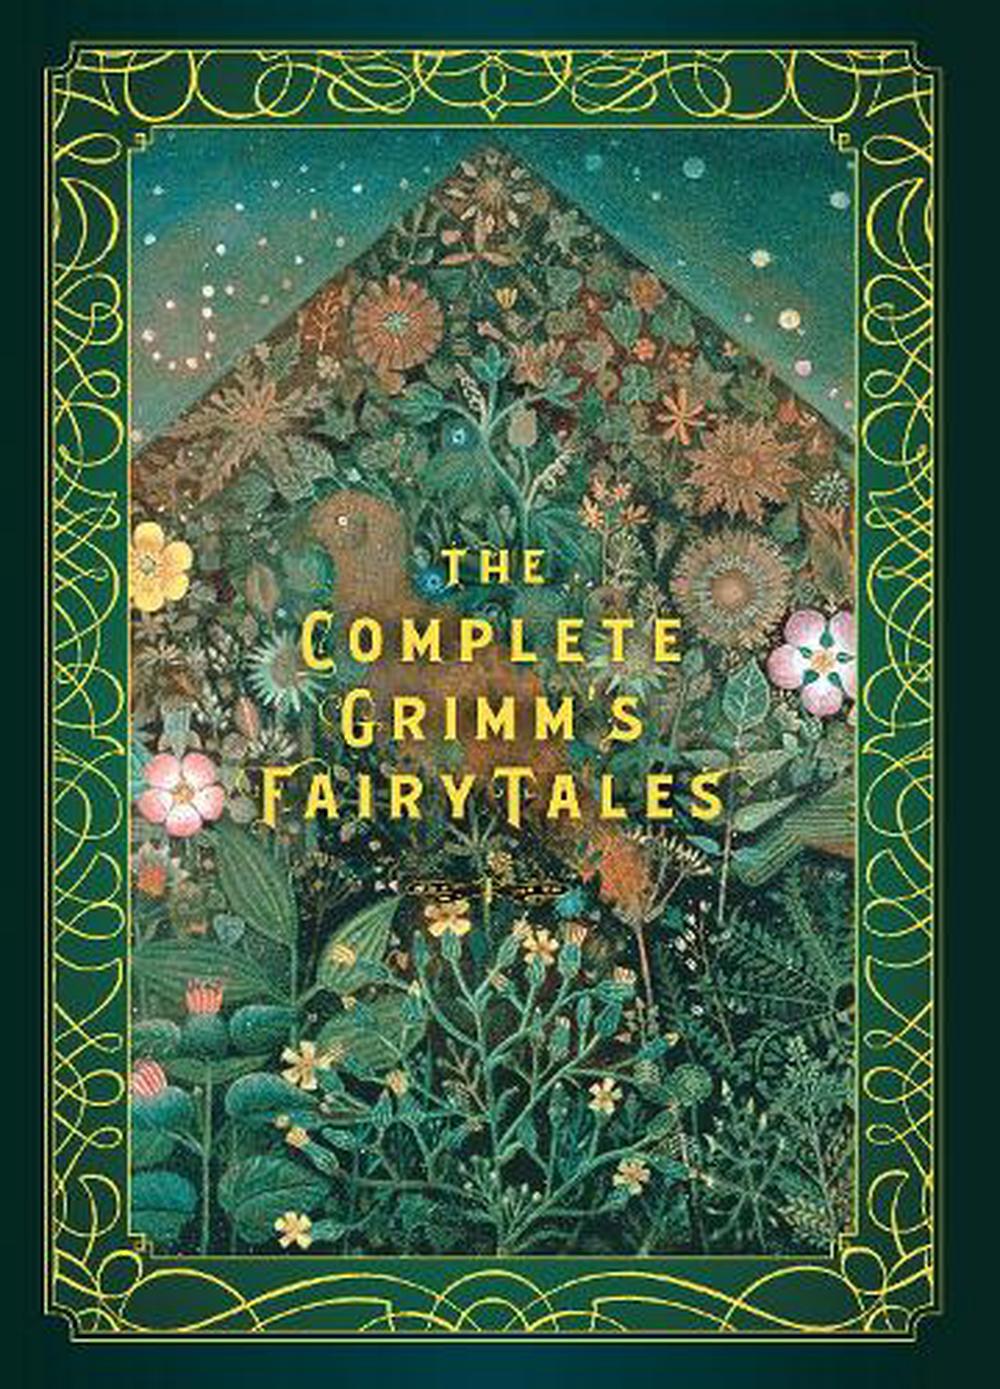 The Complete Grimms Fairy Tales By Jacob Grimm Hardcover